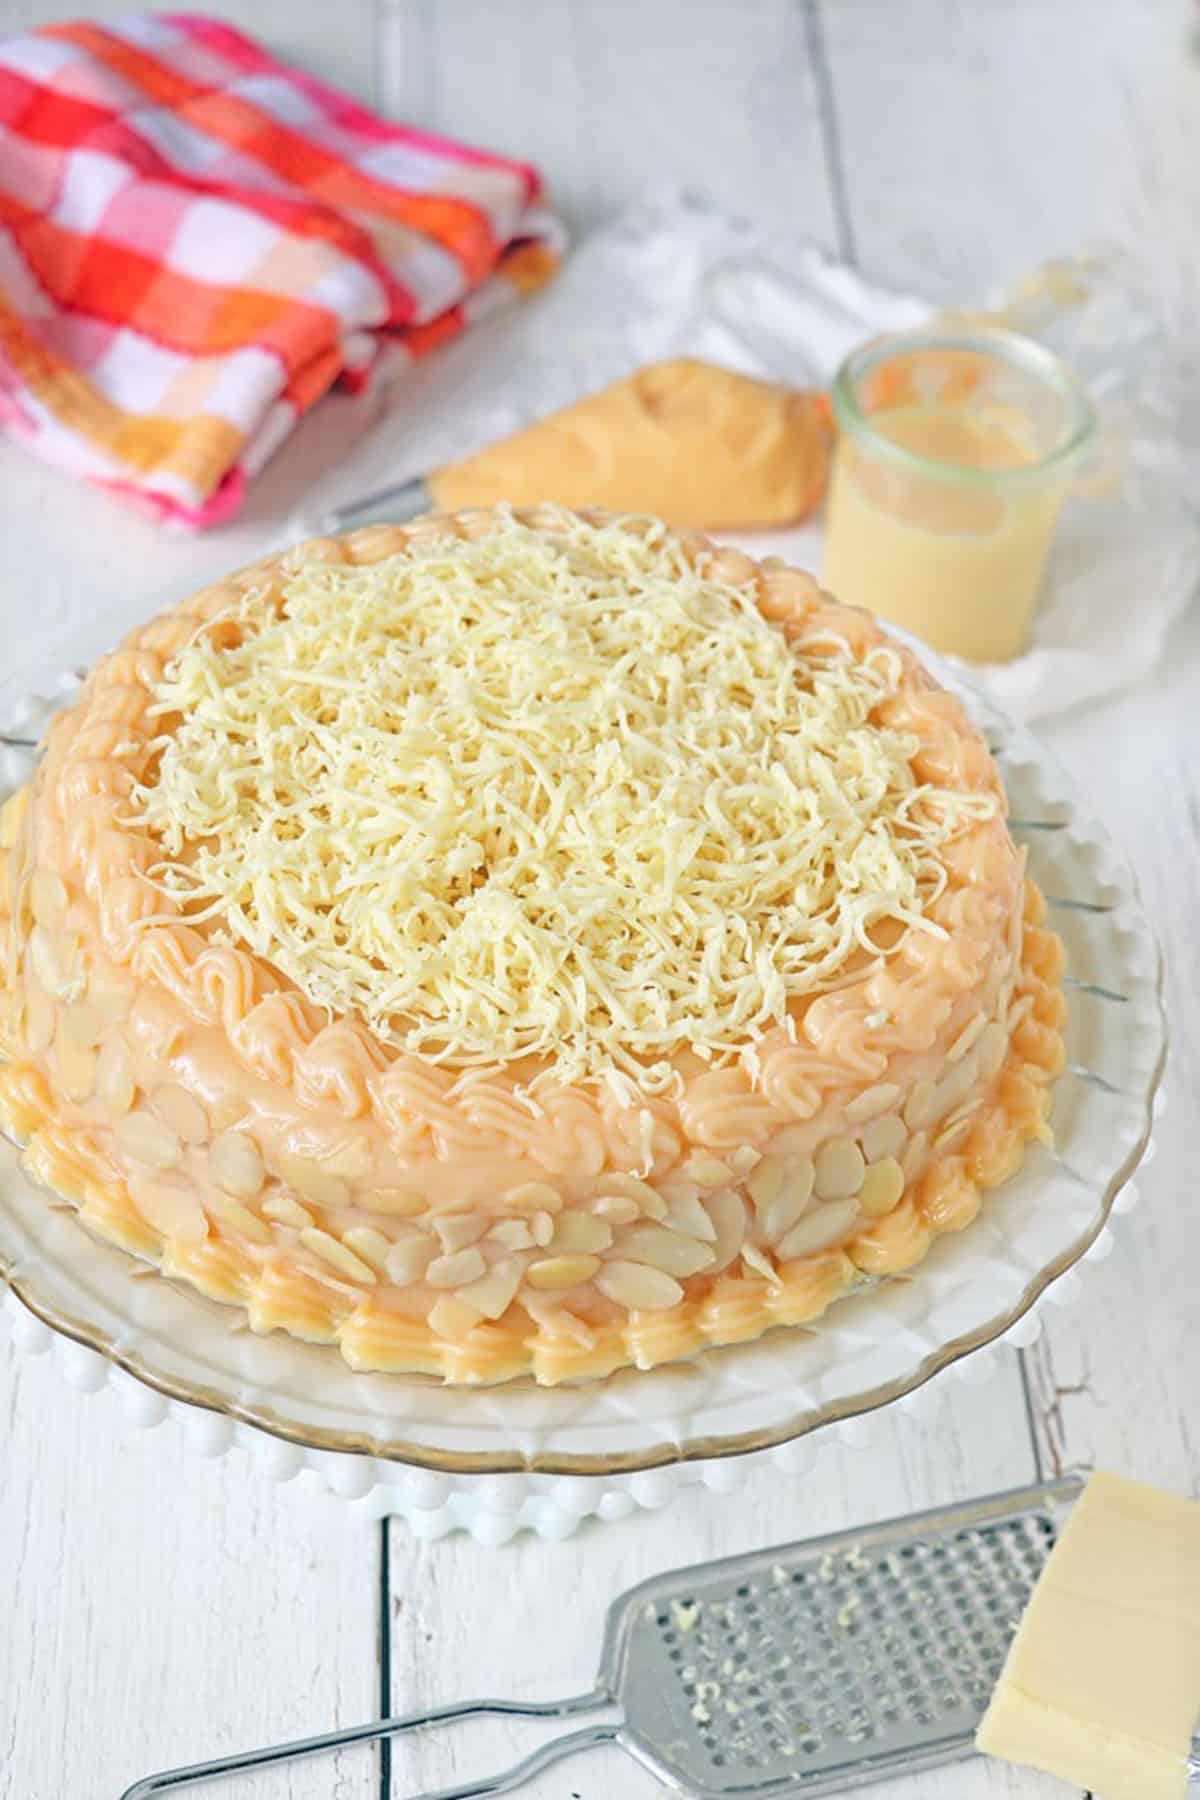 Yema cake made of sponge cake, yema spread, and grated cheese on a serving platter